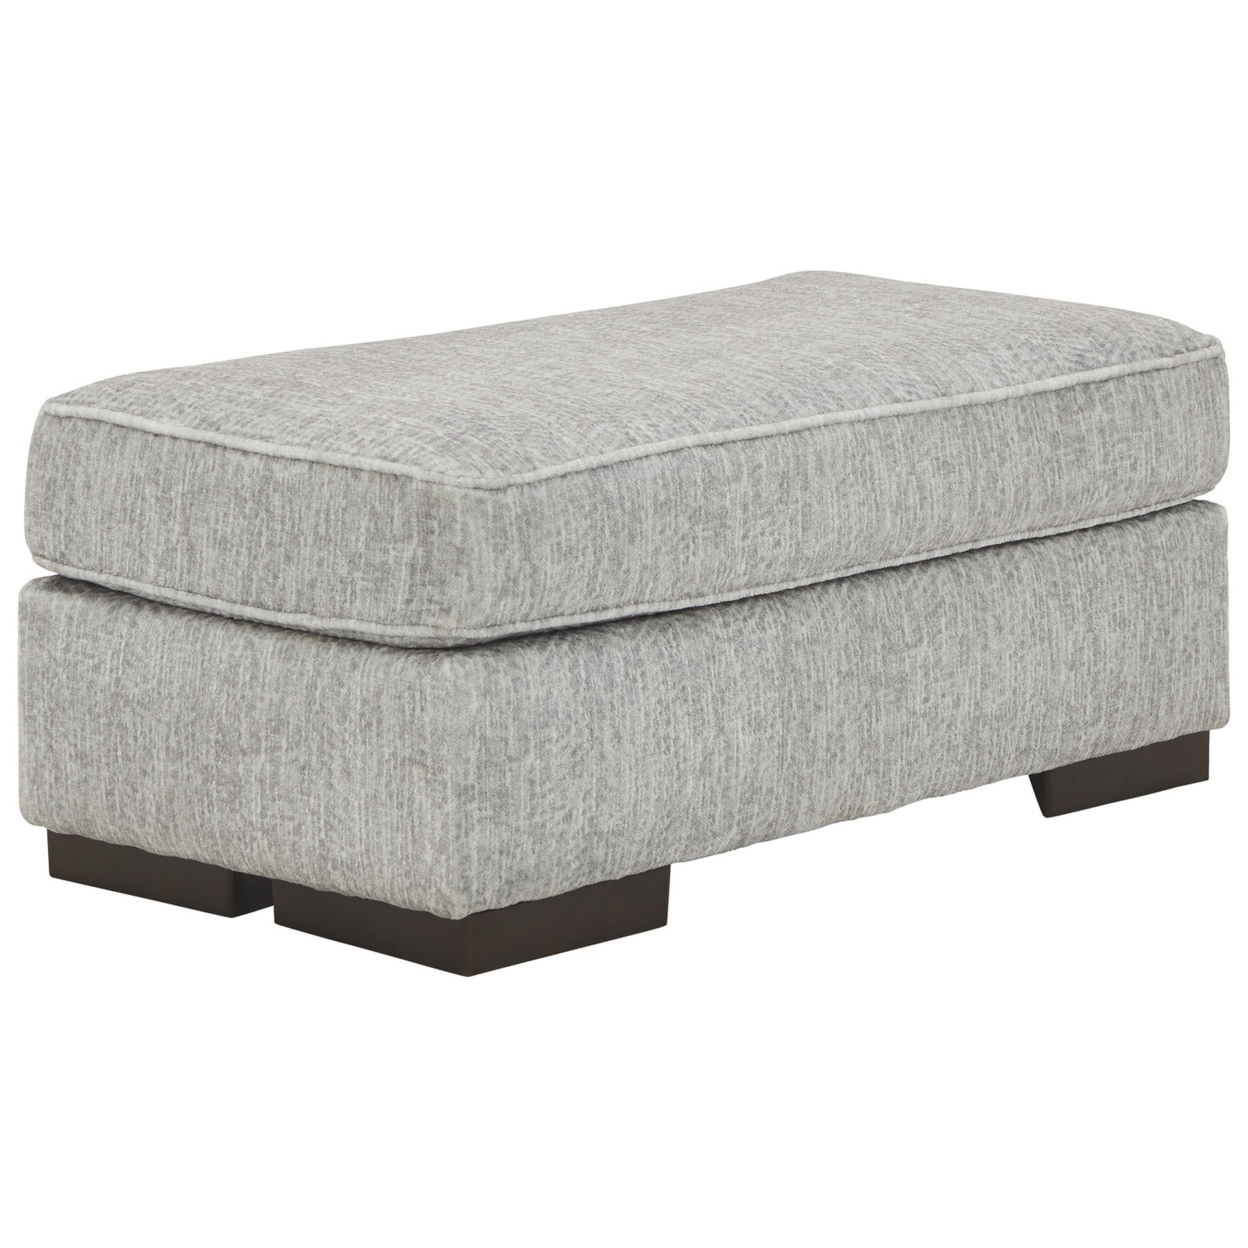 Ottoman With Fabric Upholstery And Welt Trim Details, Gray- Saltoro Sherpi